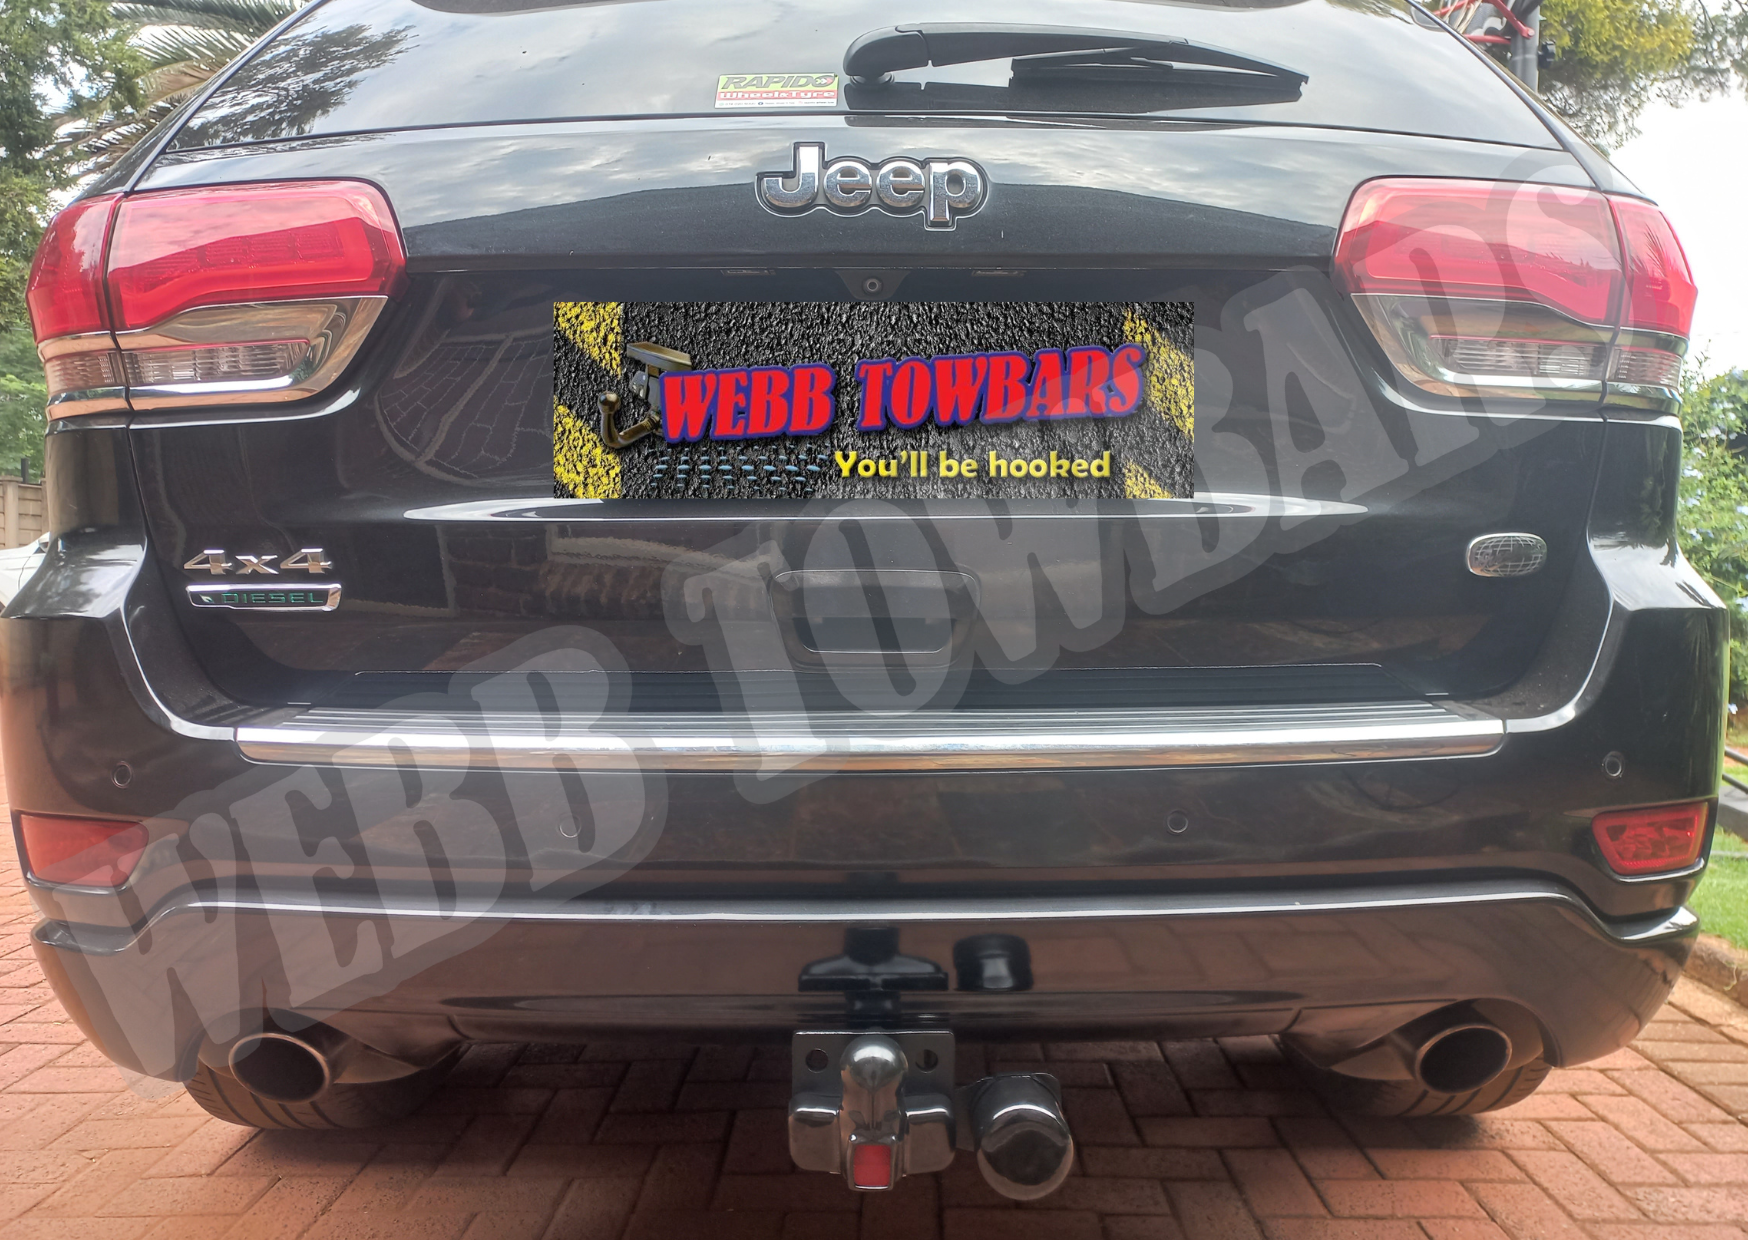 Elevate your Jeep Grand Cherokee with a Standard Towbar from Webb Towbars in Gauteng, South Africa